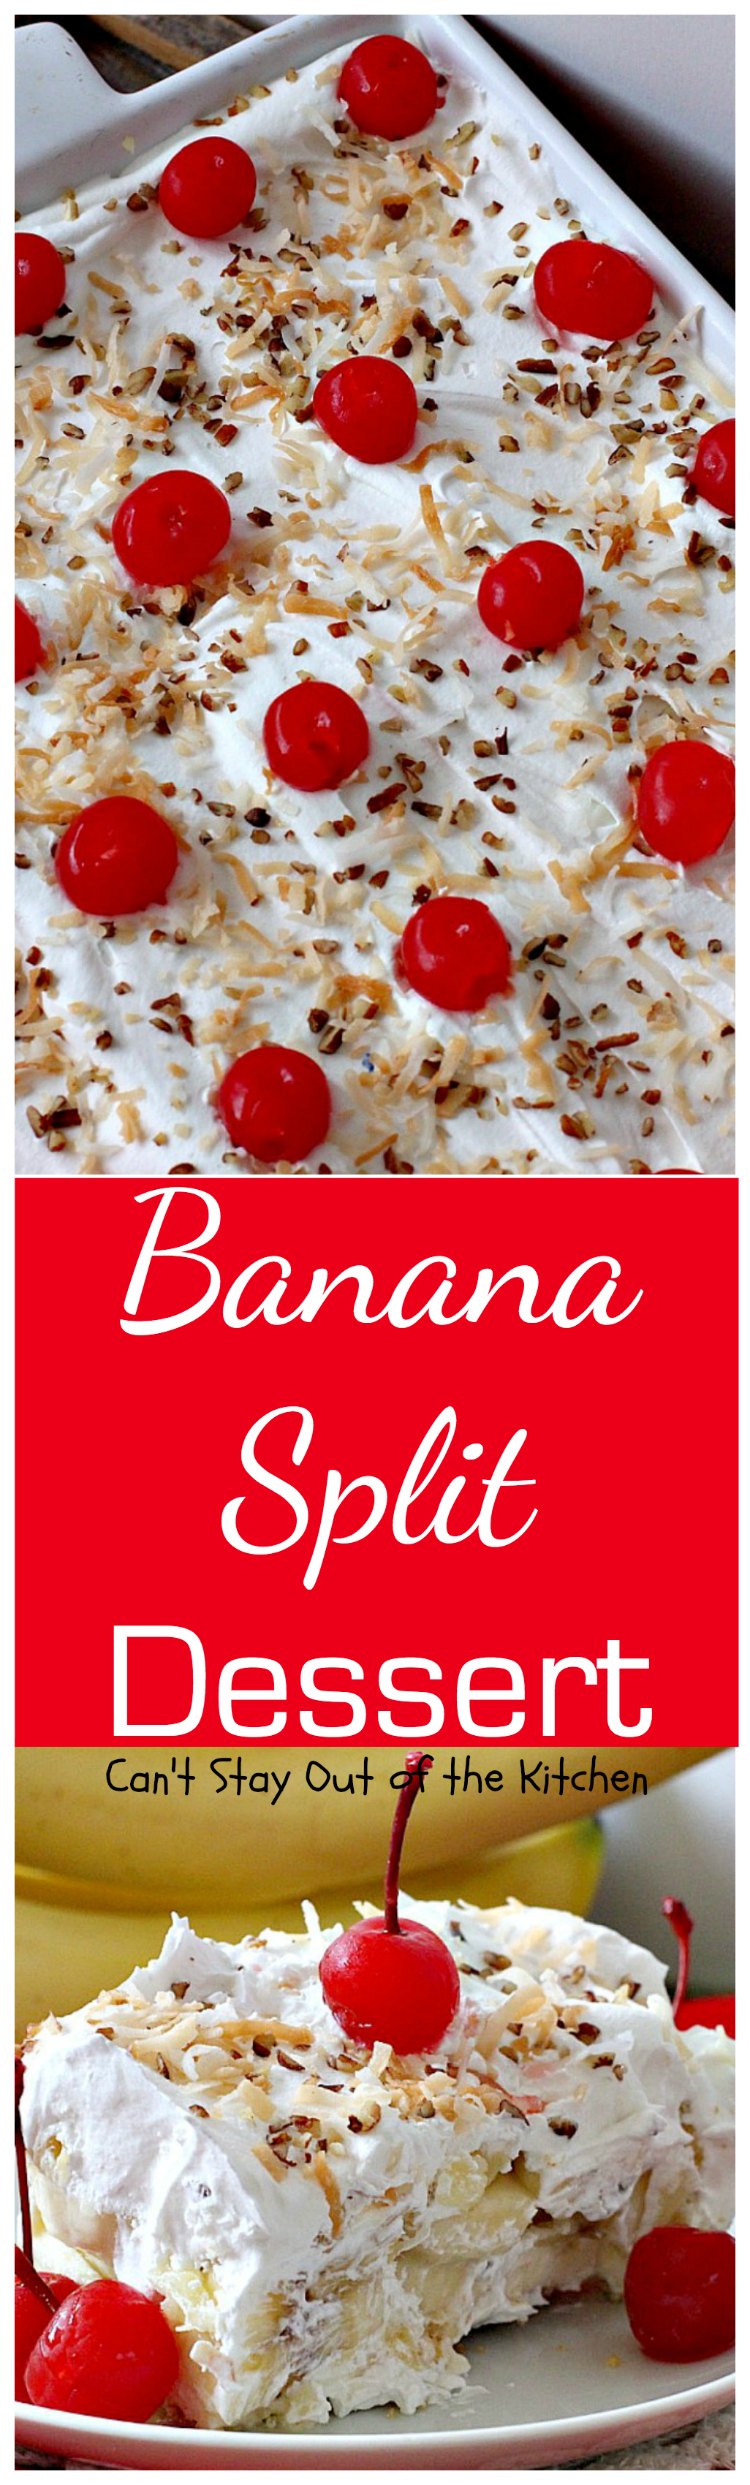 Banana Split Dessert | Can't Stay Out of the Kitchen